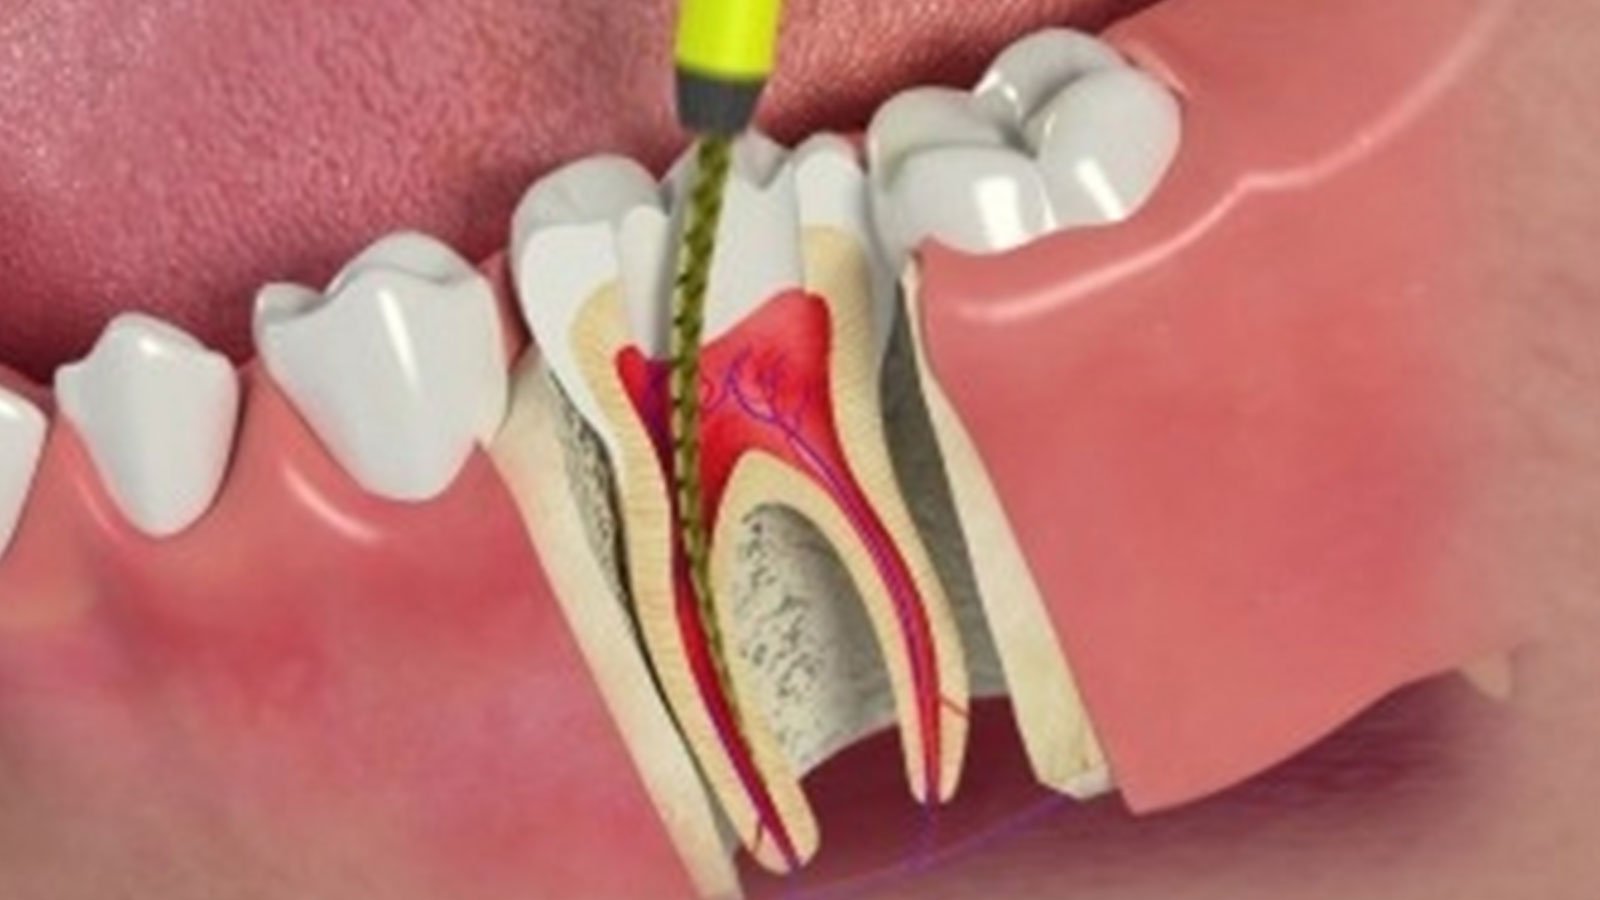 Benefits Of Root Canal Treatment